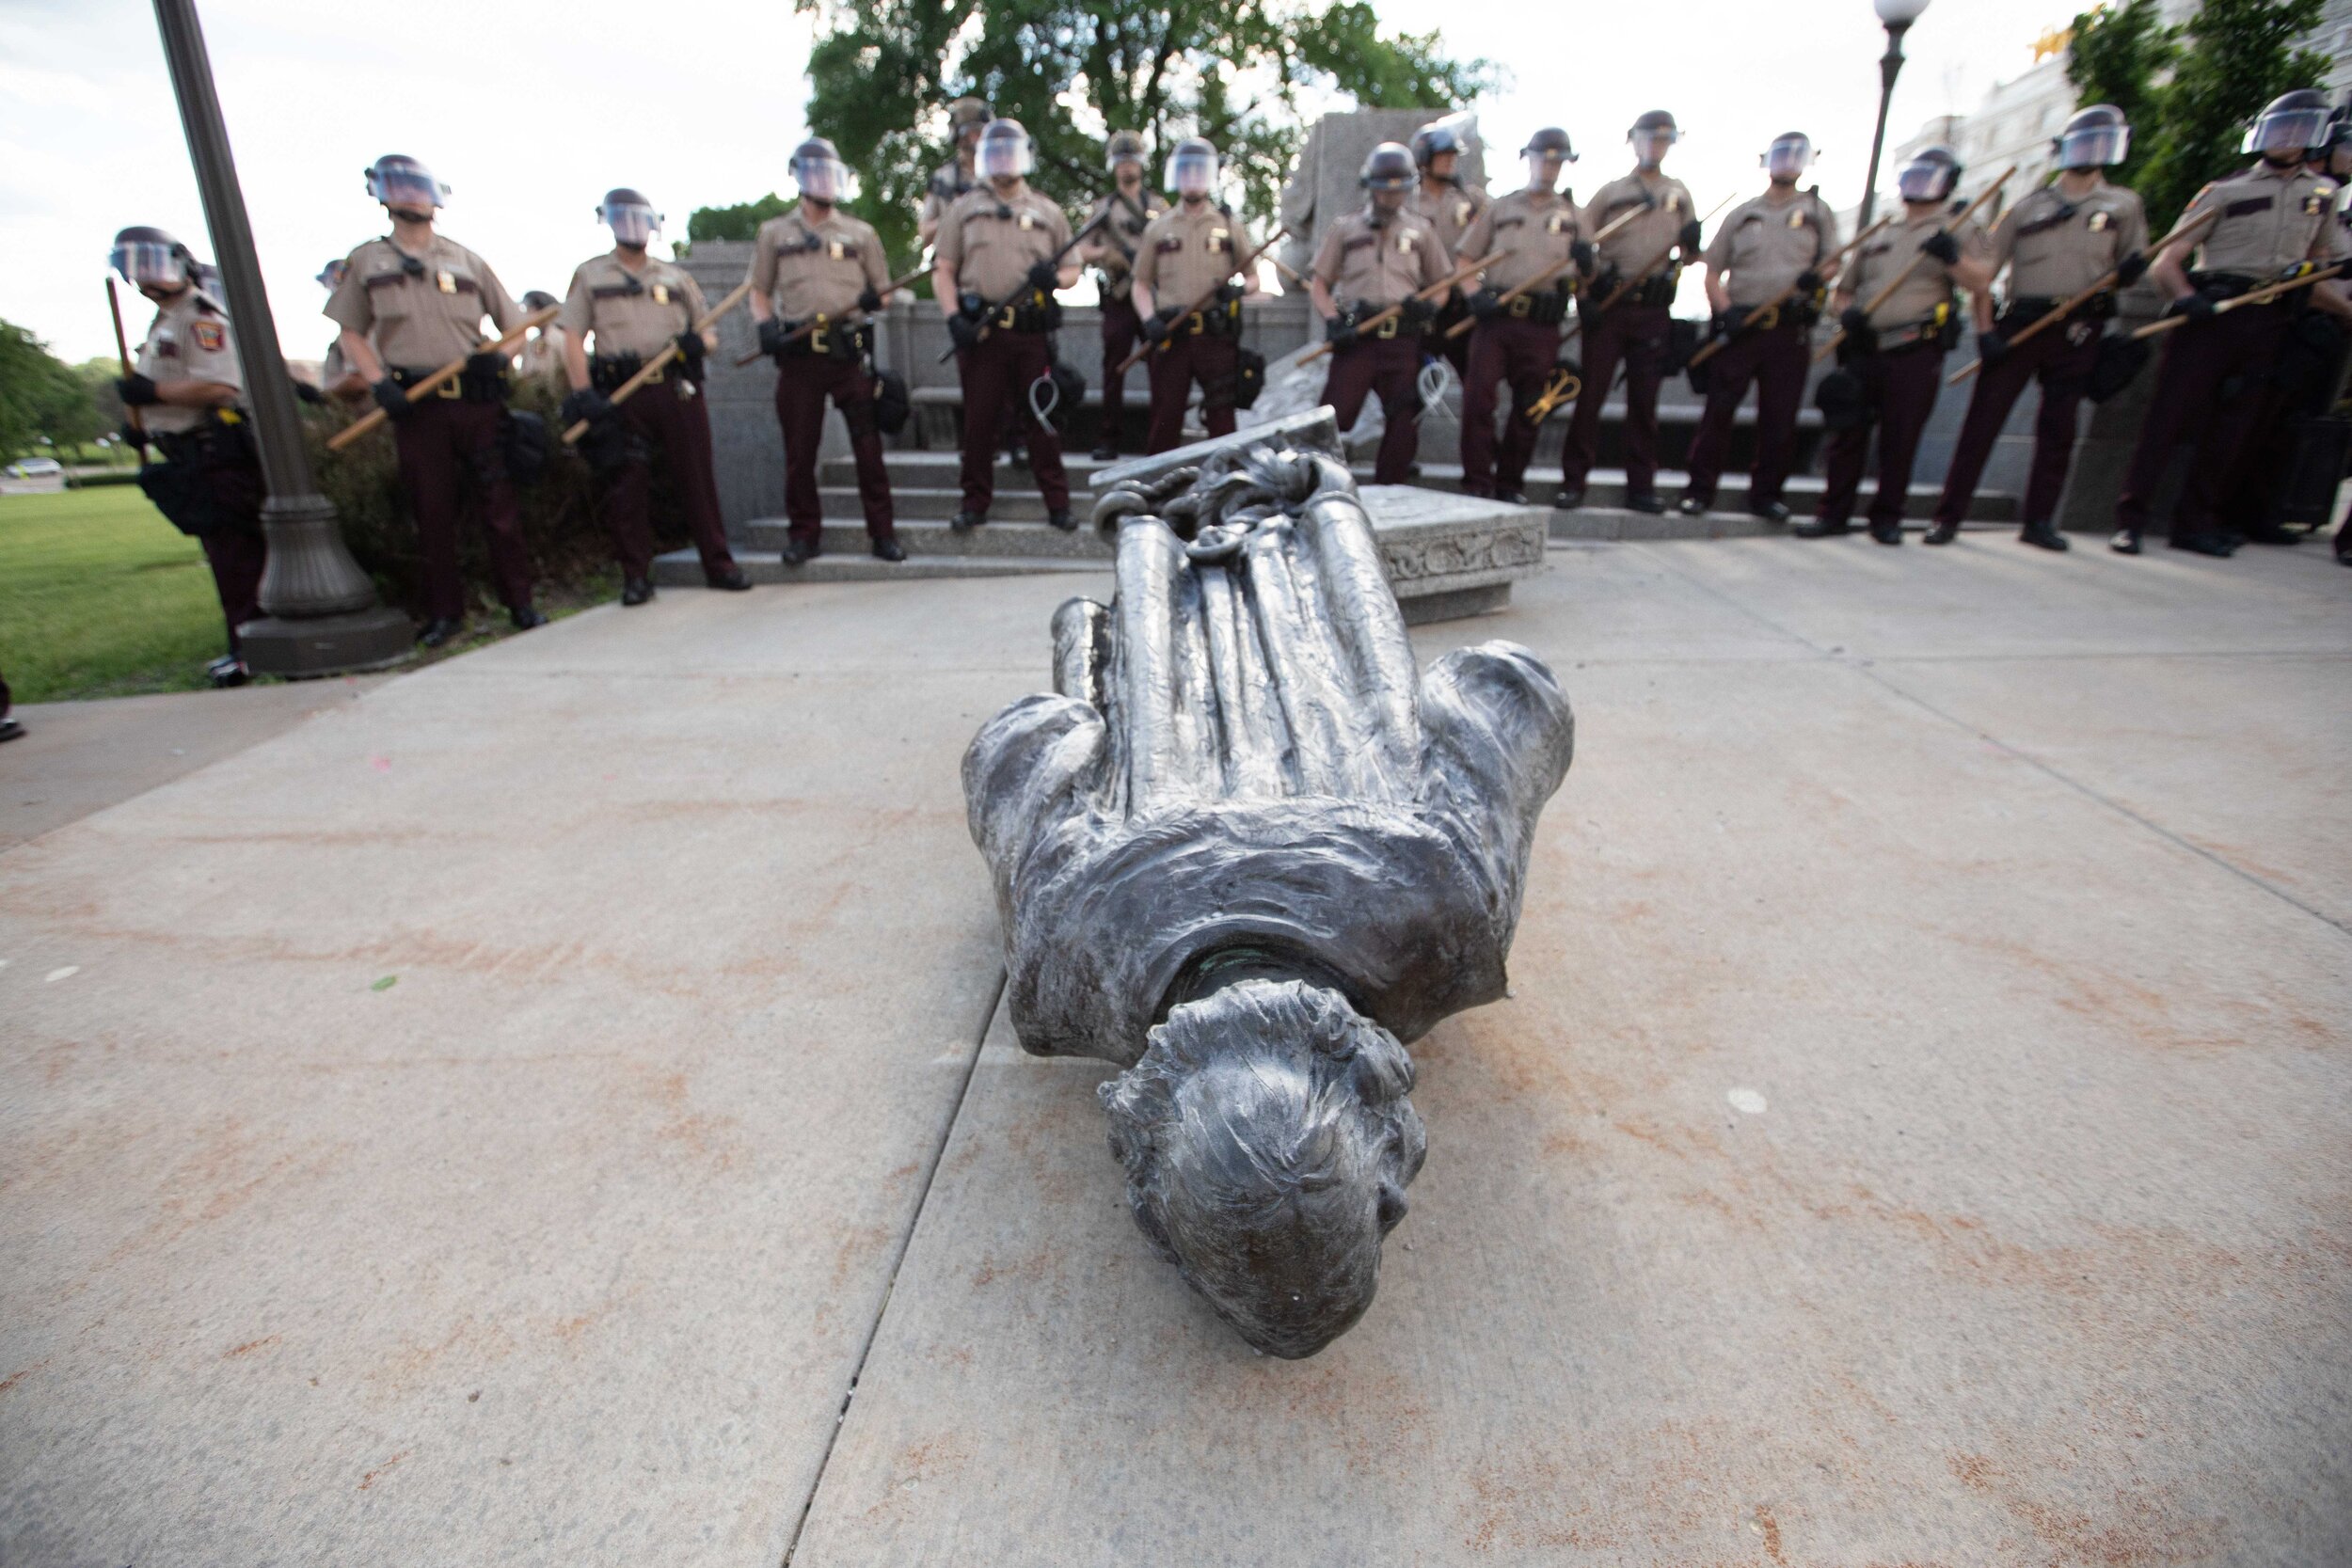  The Minnesota State Troopers stand guard behind the recently torn down Christopher Columbus statue on the grounds of the State Capitol on Jun 10, 2020. 